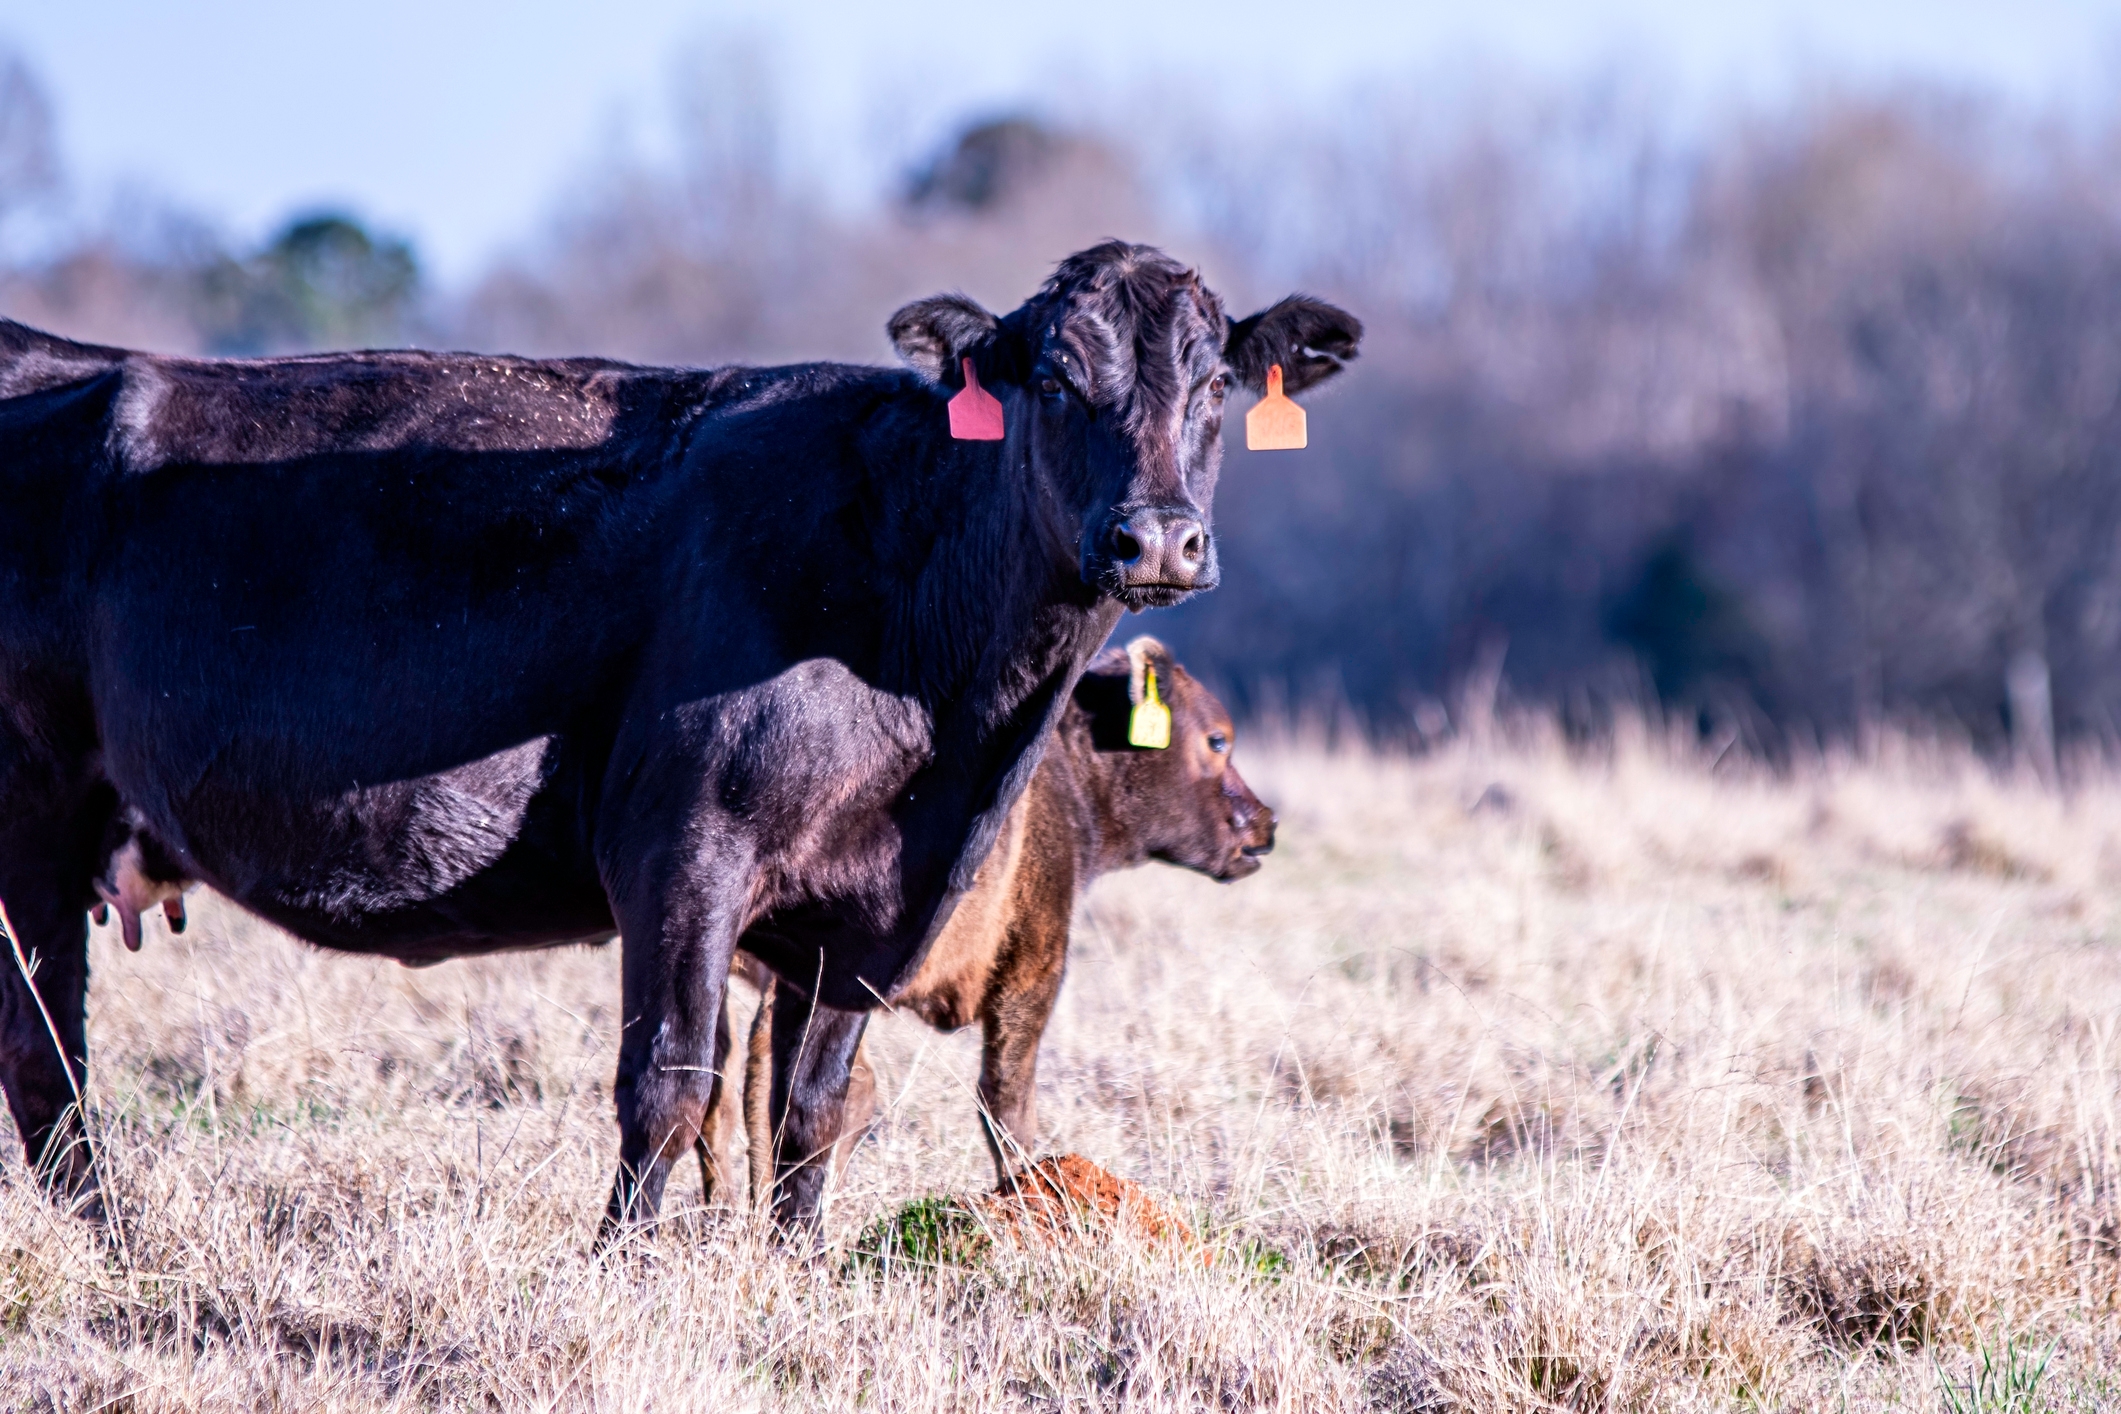 How to determine if cattle are bulls, steers, cows or heifers